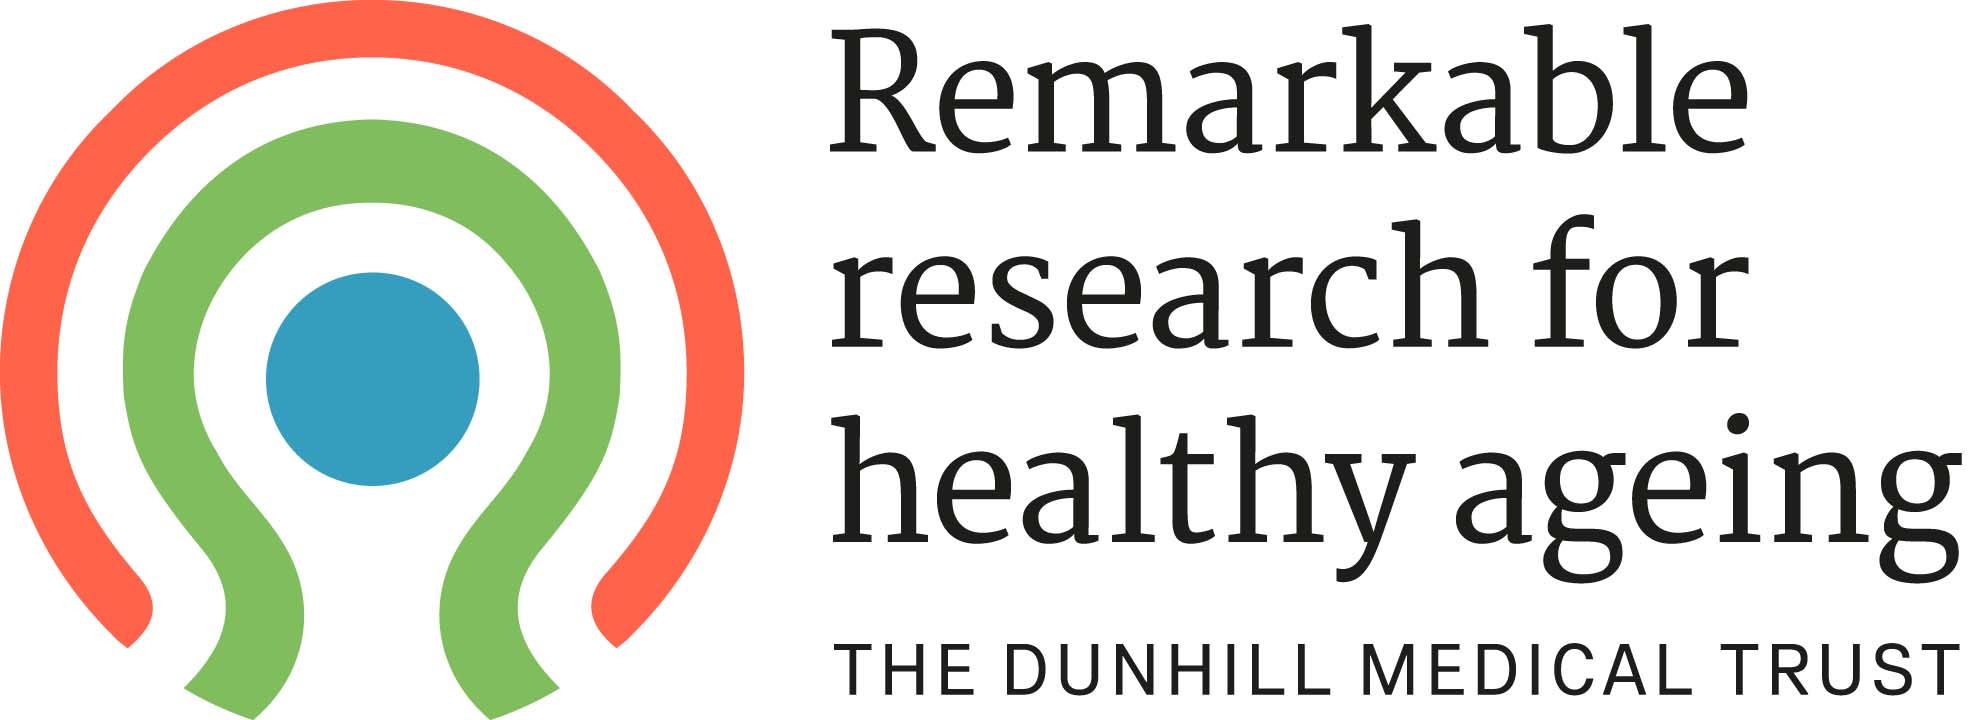 The Dunhill Medical Trust